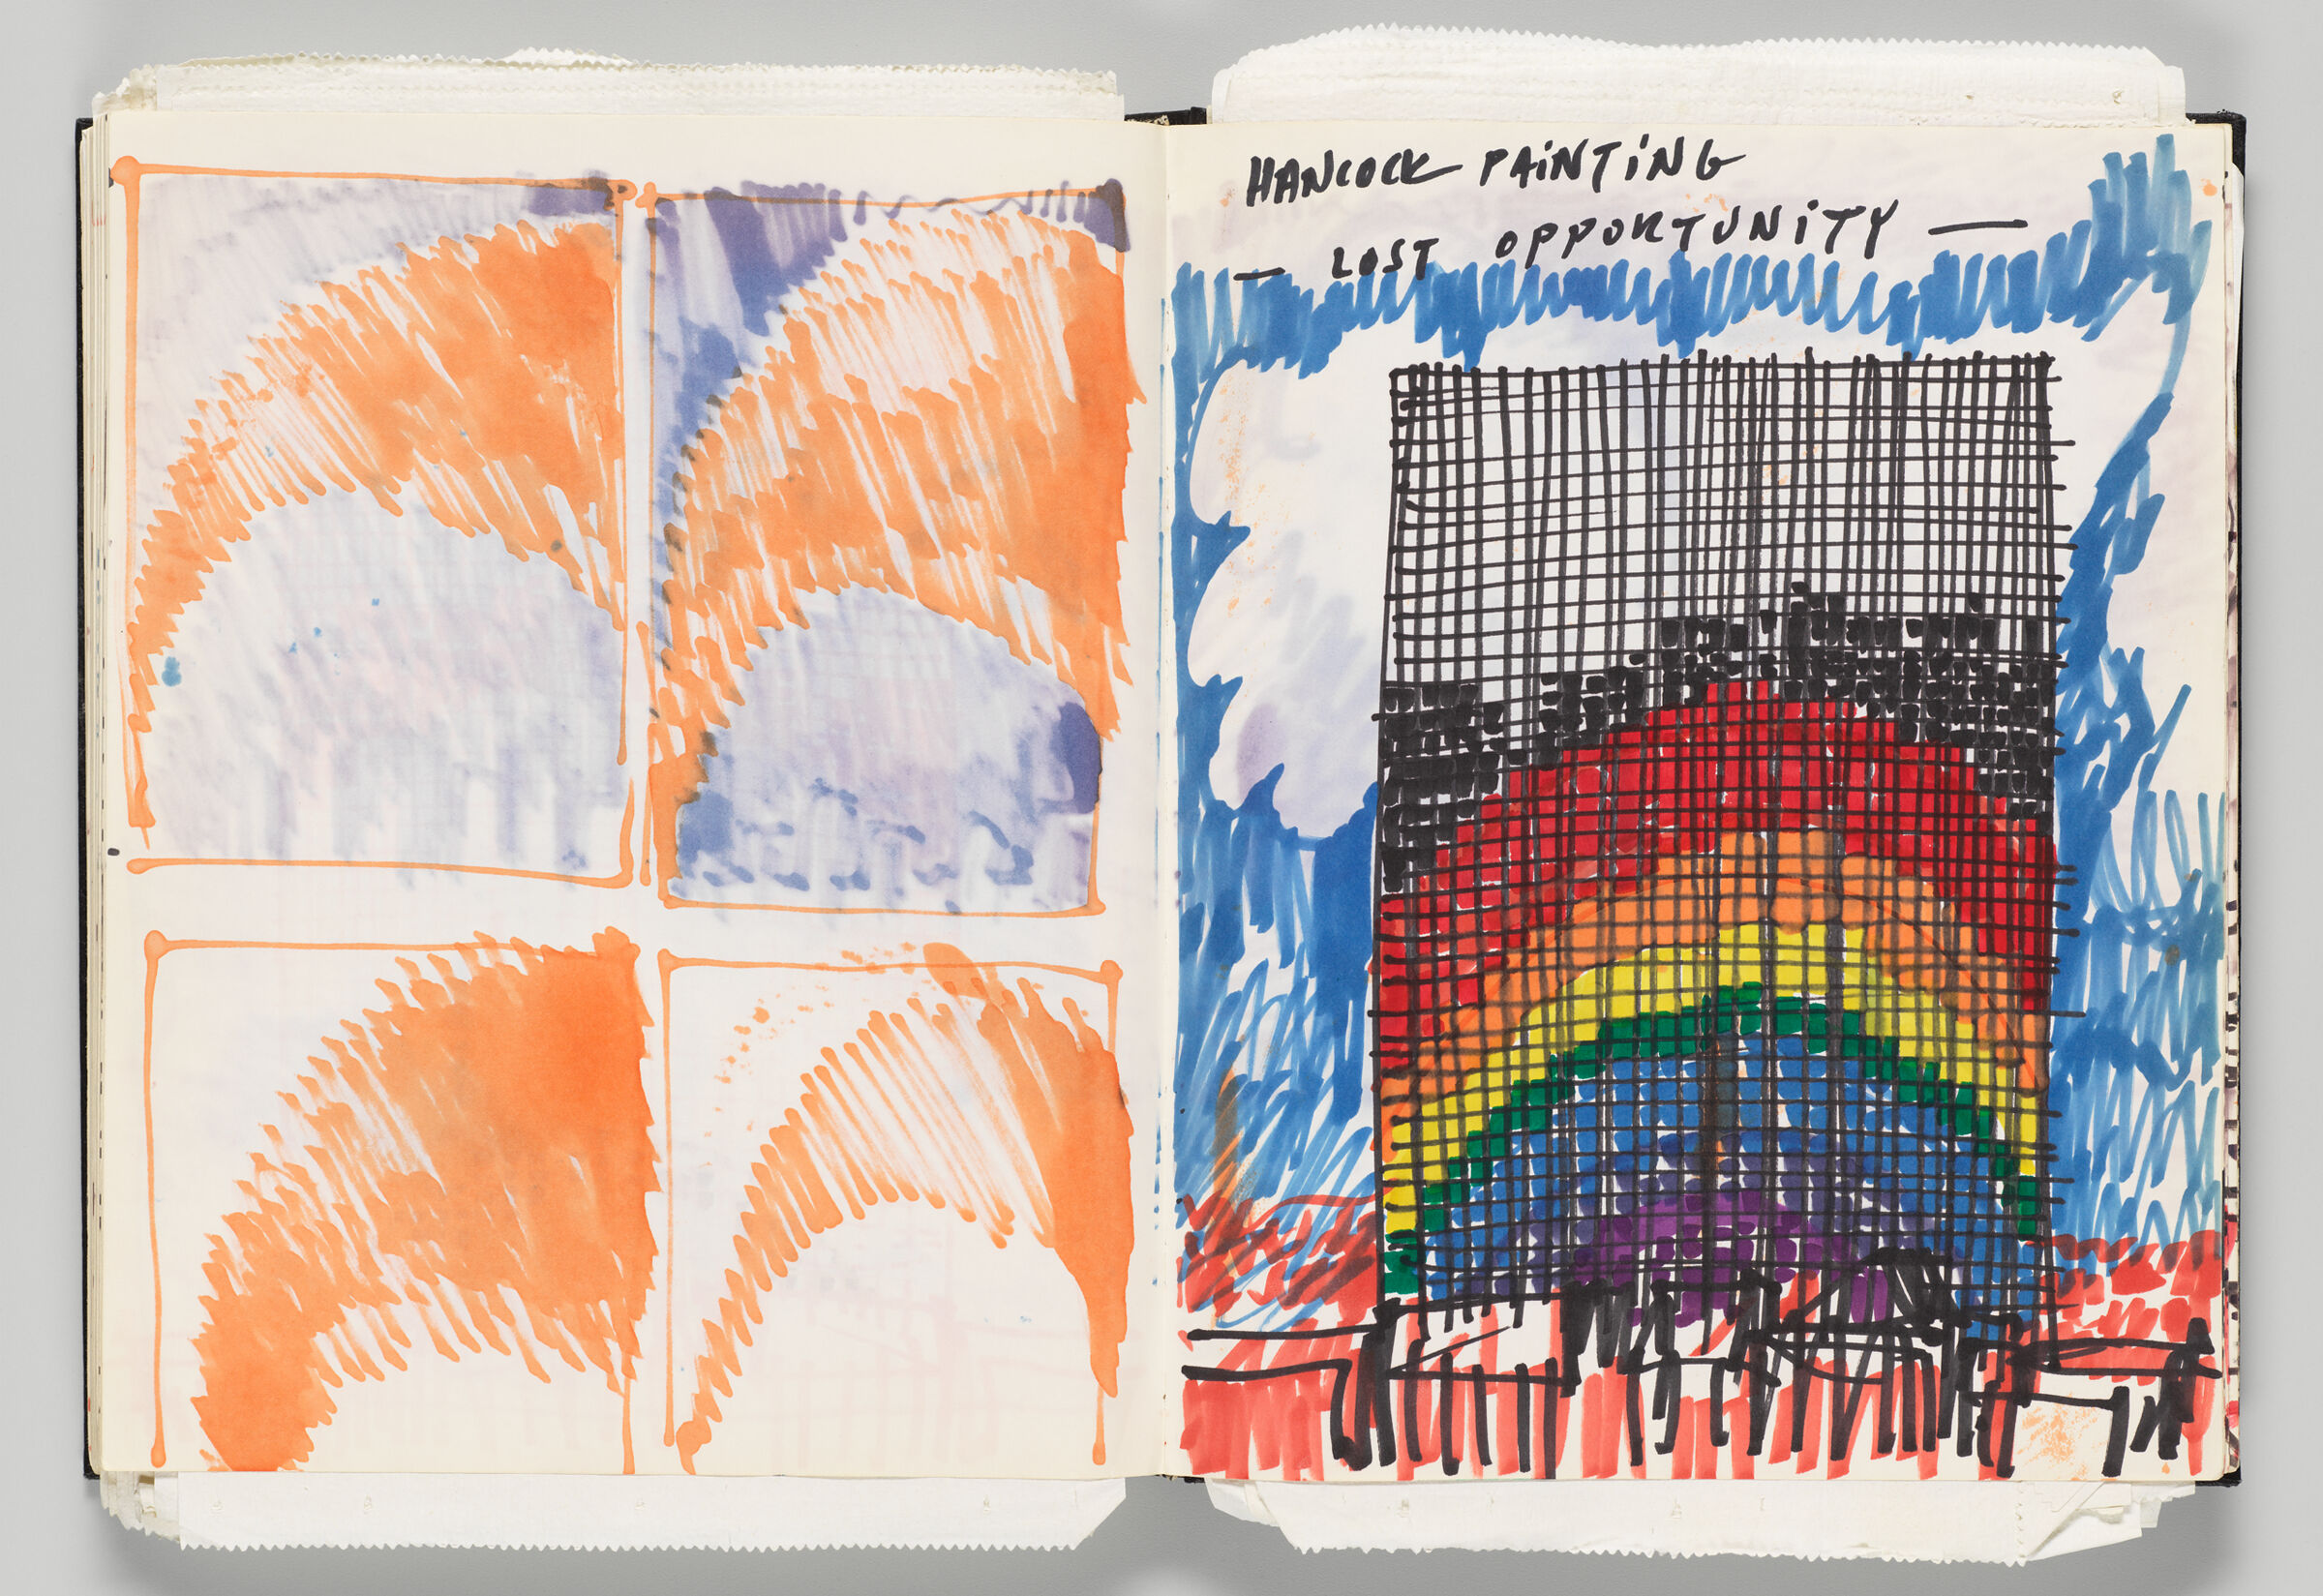 Untitled (Bleed-Through Of Previous Page, Left Page); Untitled (Jubilee Project Design With Color Transfer, Right Page)